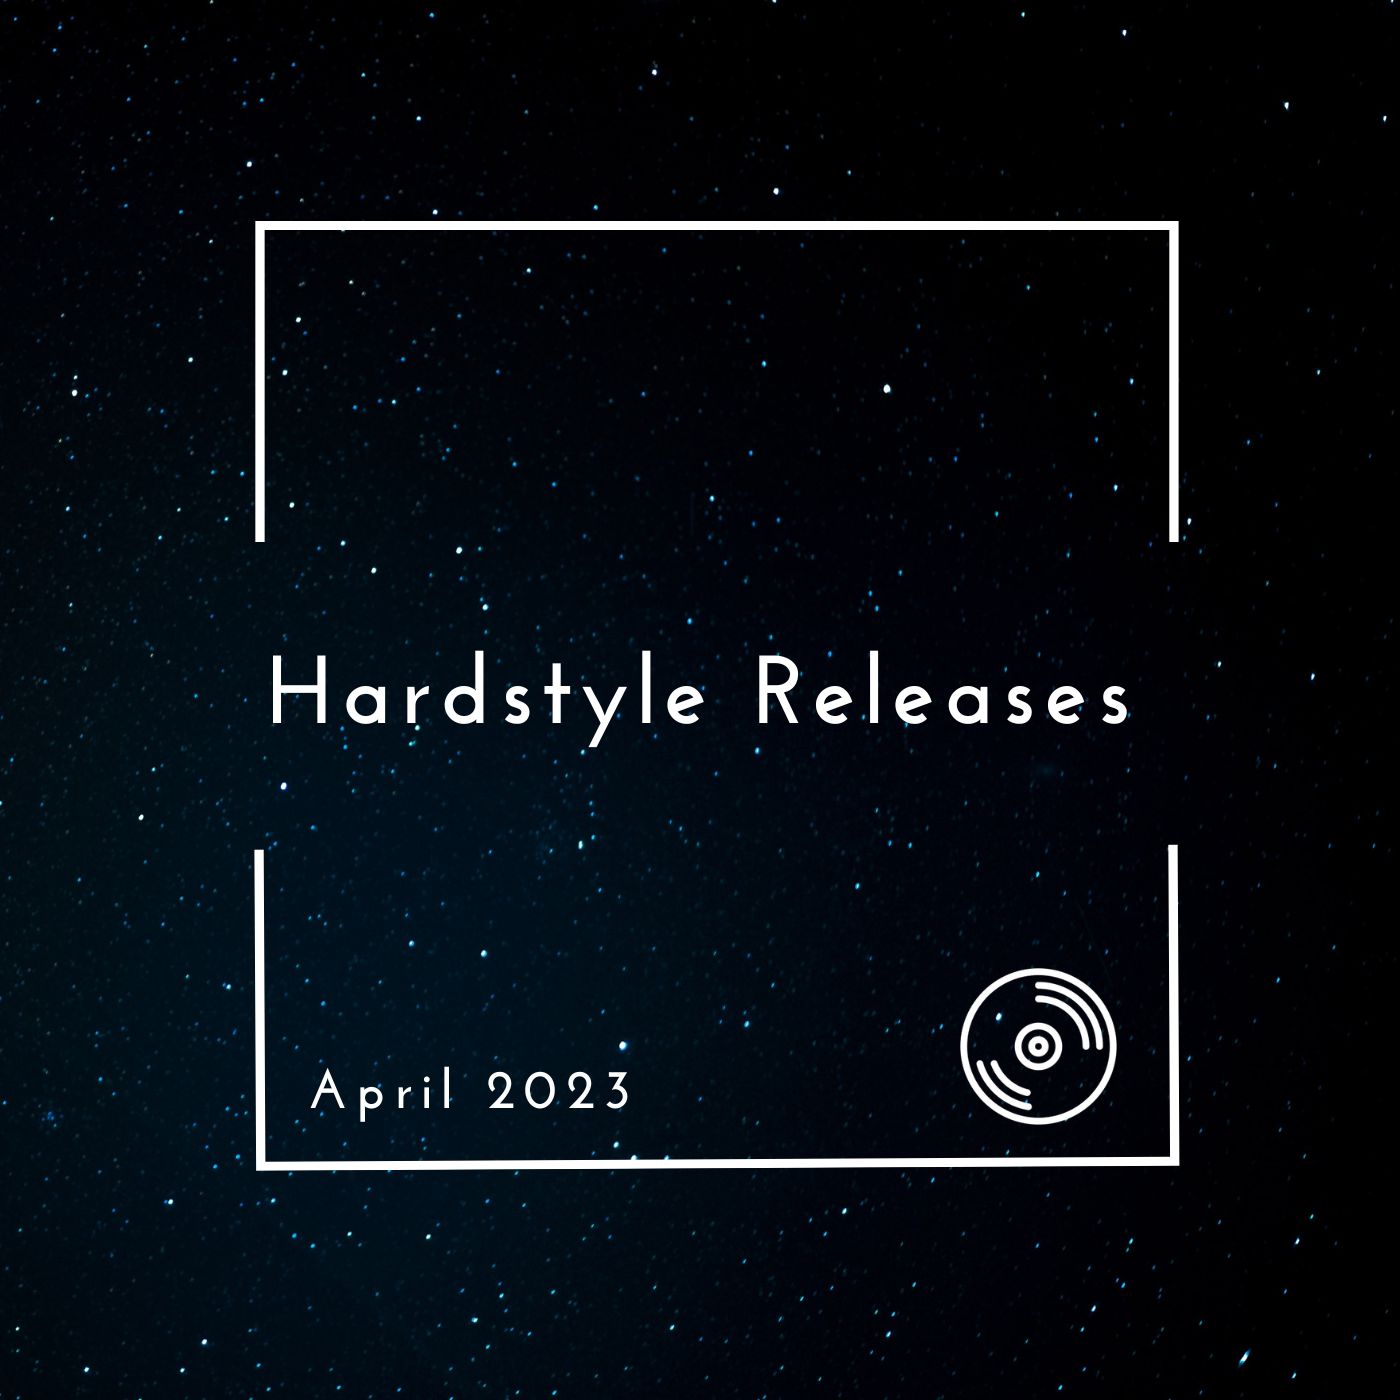 Hardstyle Releases April 2023